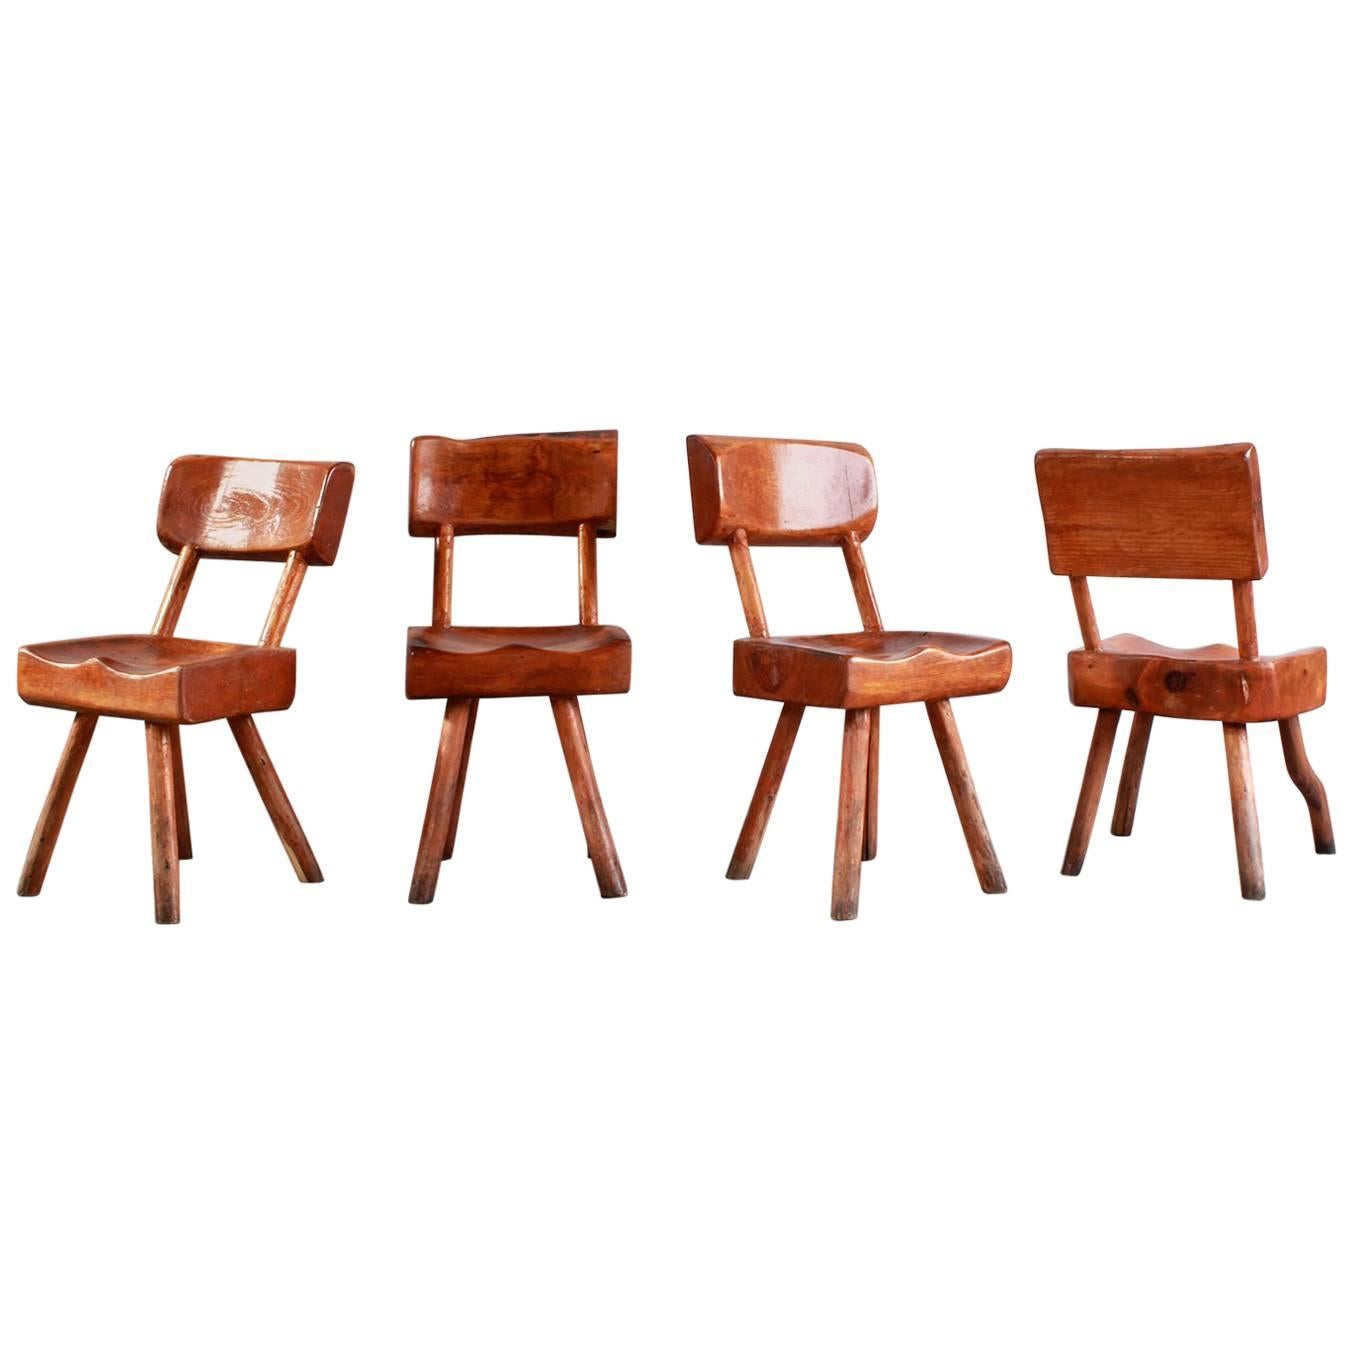 Set of Four Rustic Log Chairs